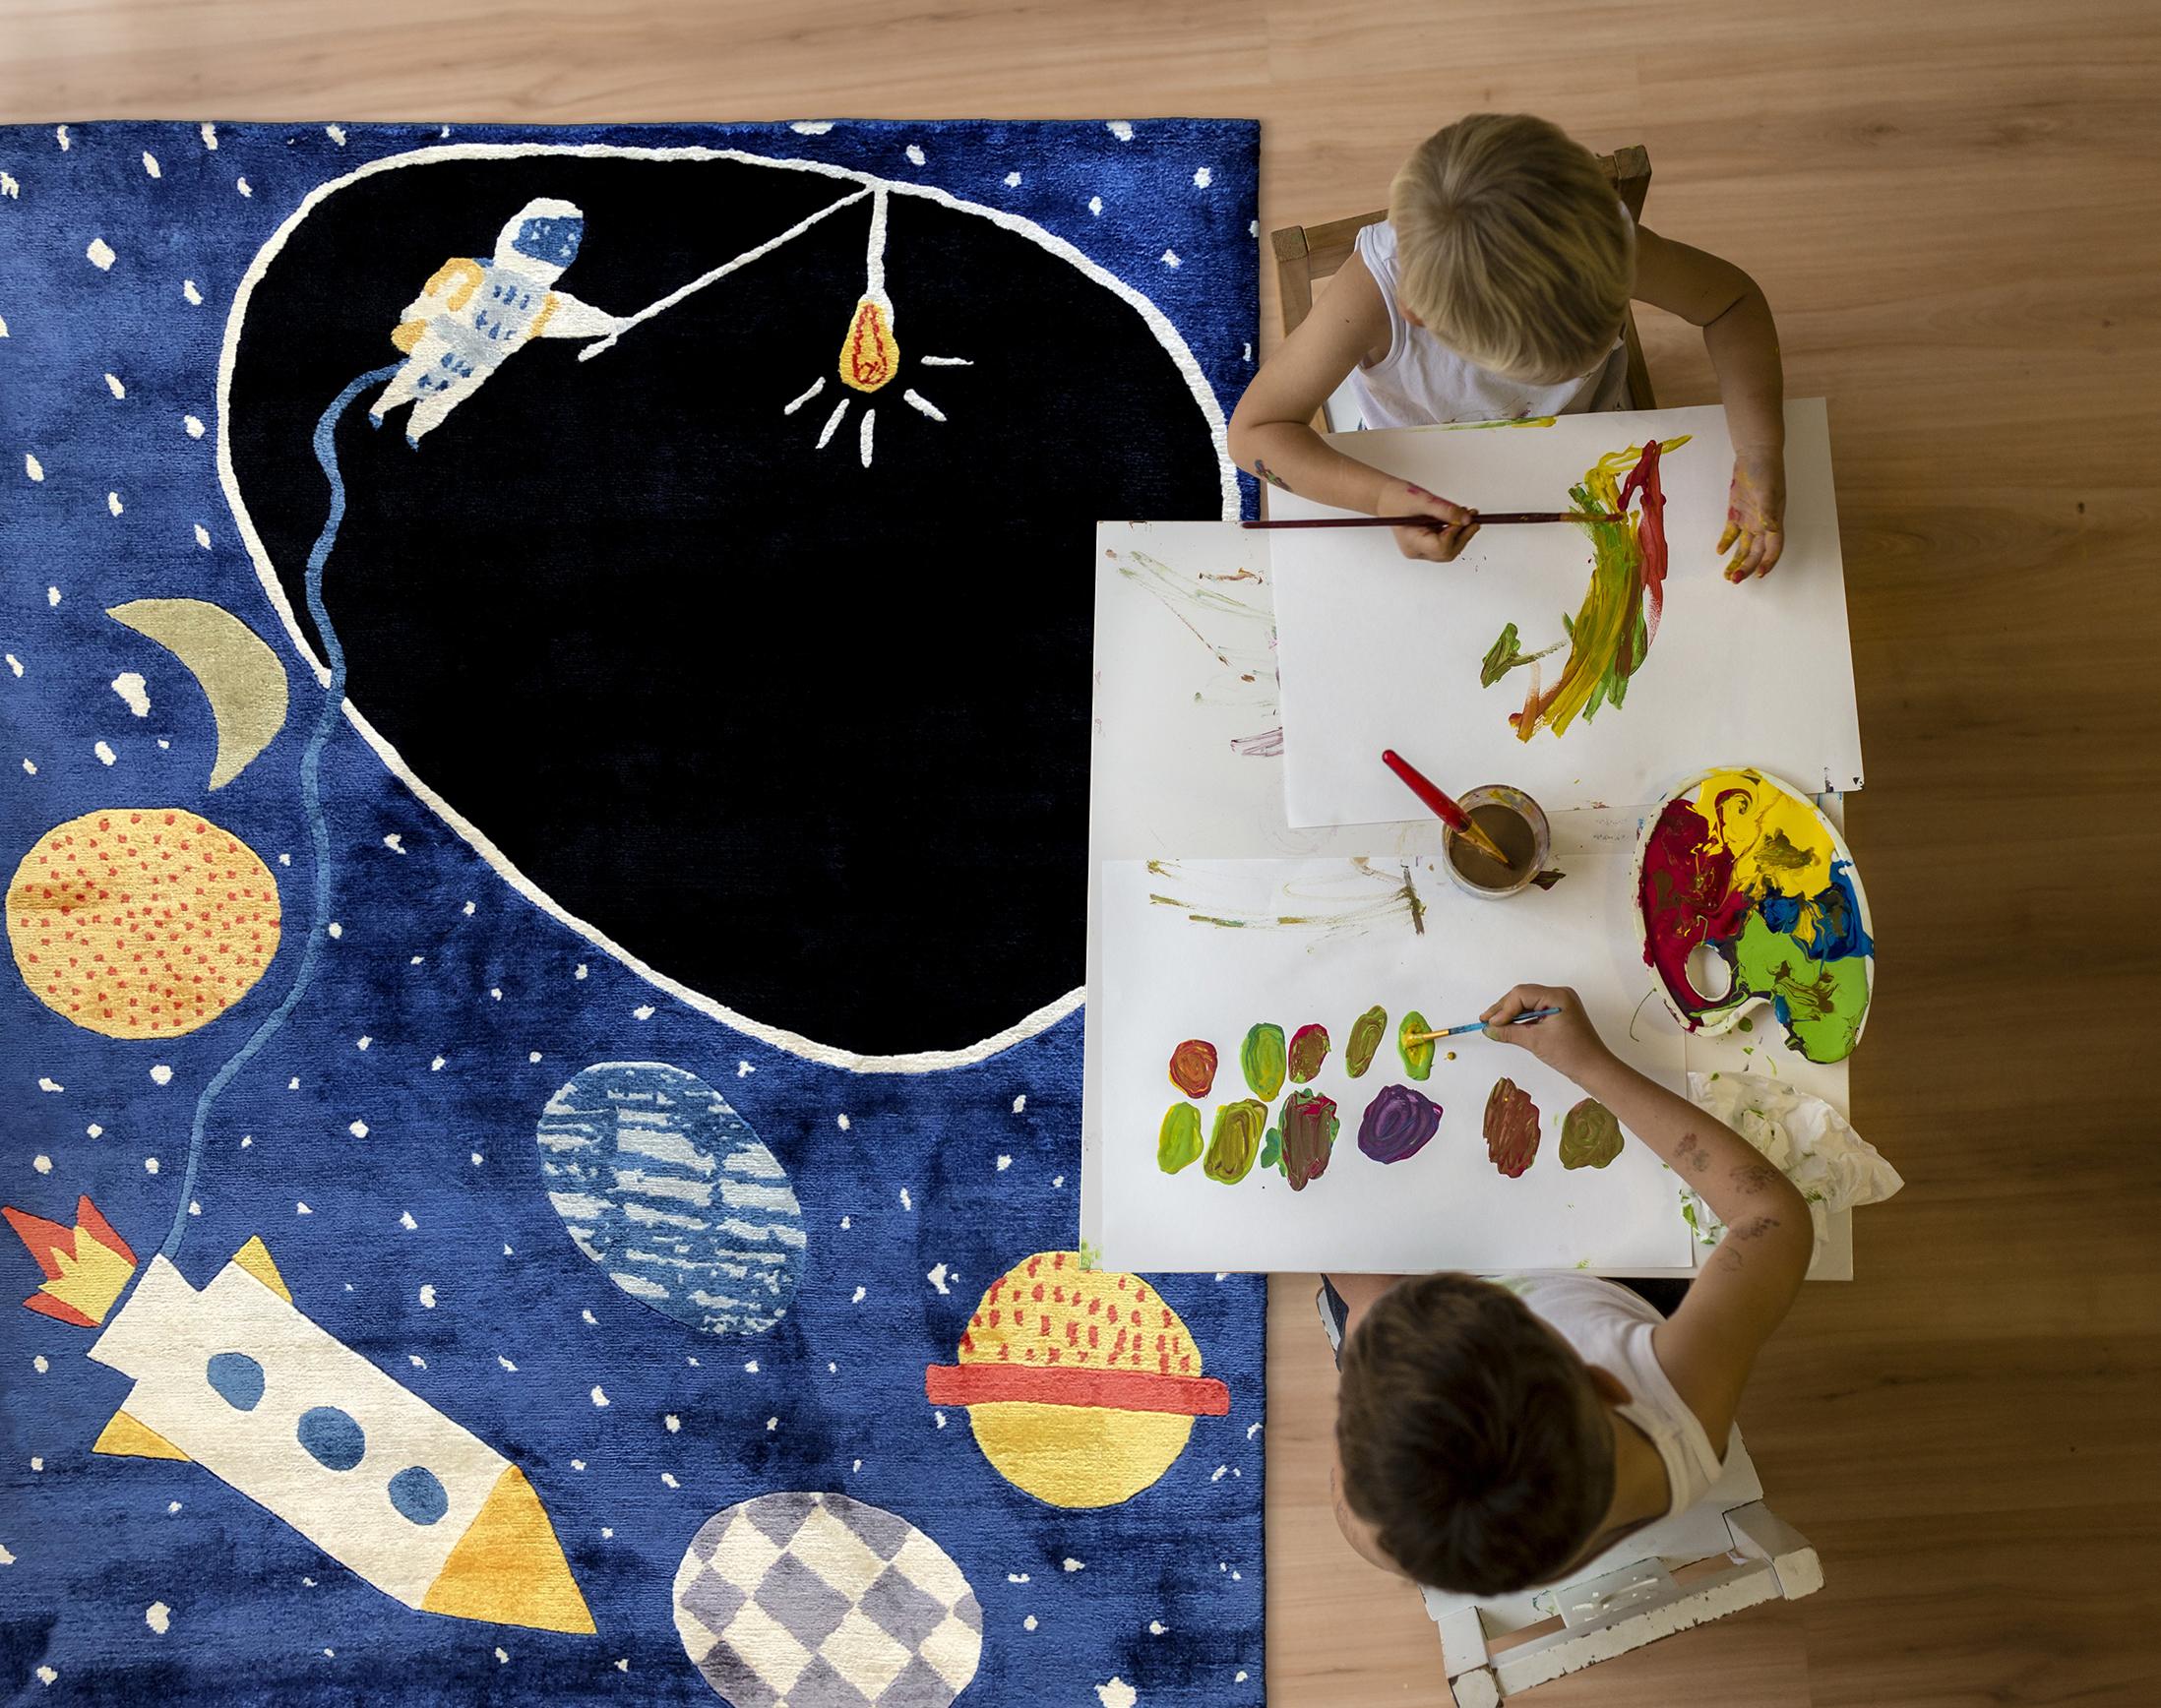 Space Ace Hand-Knotted Designer Rug by Illustrator Daria Solak

Ignite your imagination with Space Ace, a whimsical hand-knotted rug designed by London-based illustrator Daria Solak. This playful creation captures the essence of a childlike